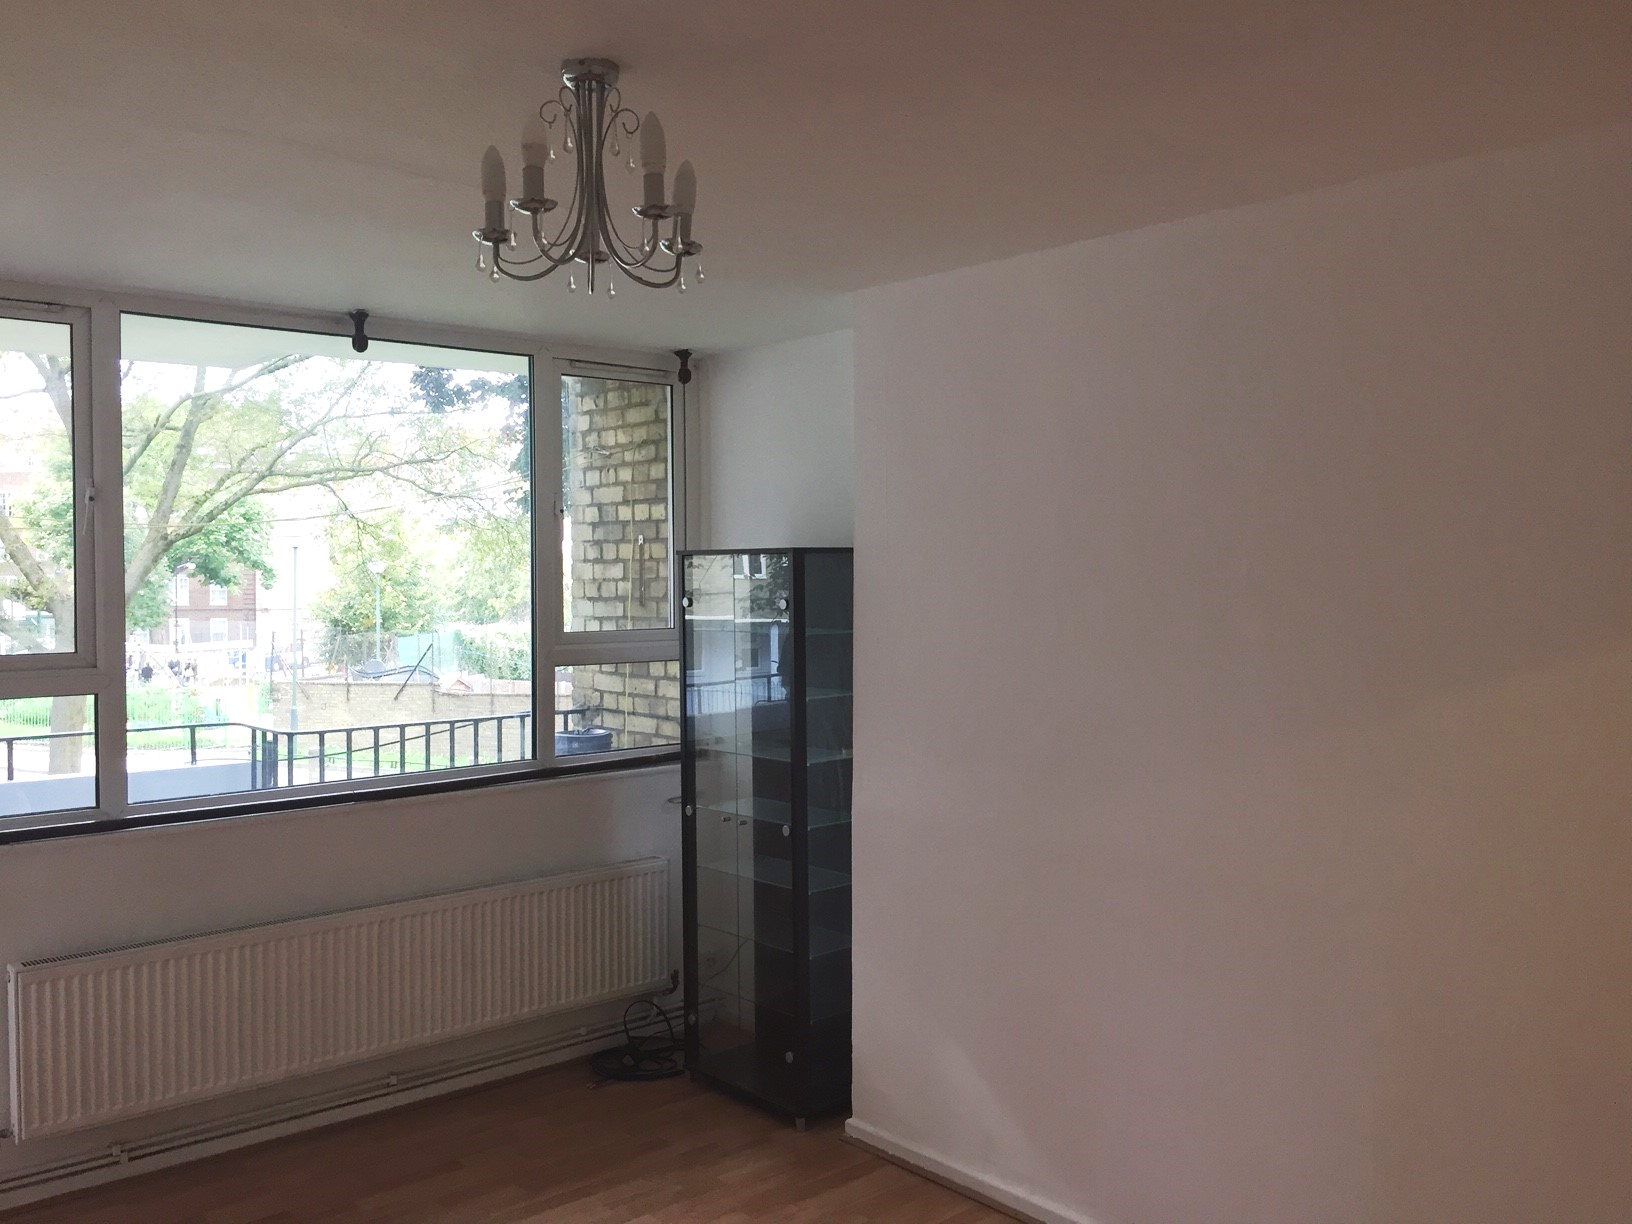 Newly refurbished two bedroom flat located Holloway N7.